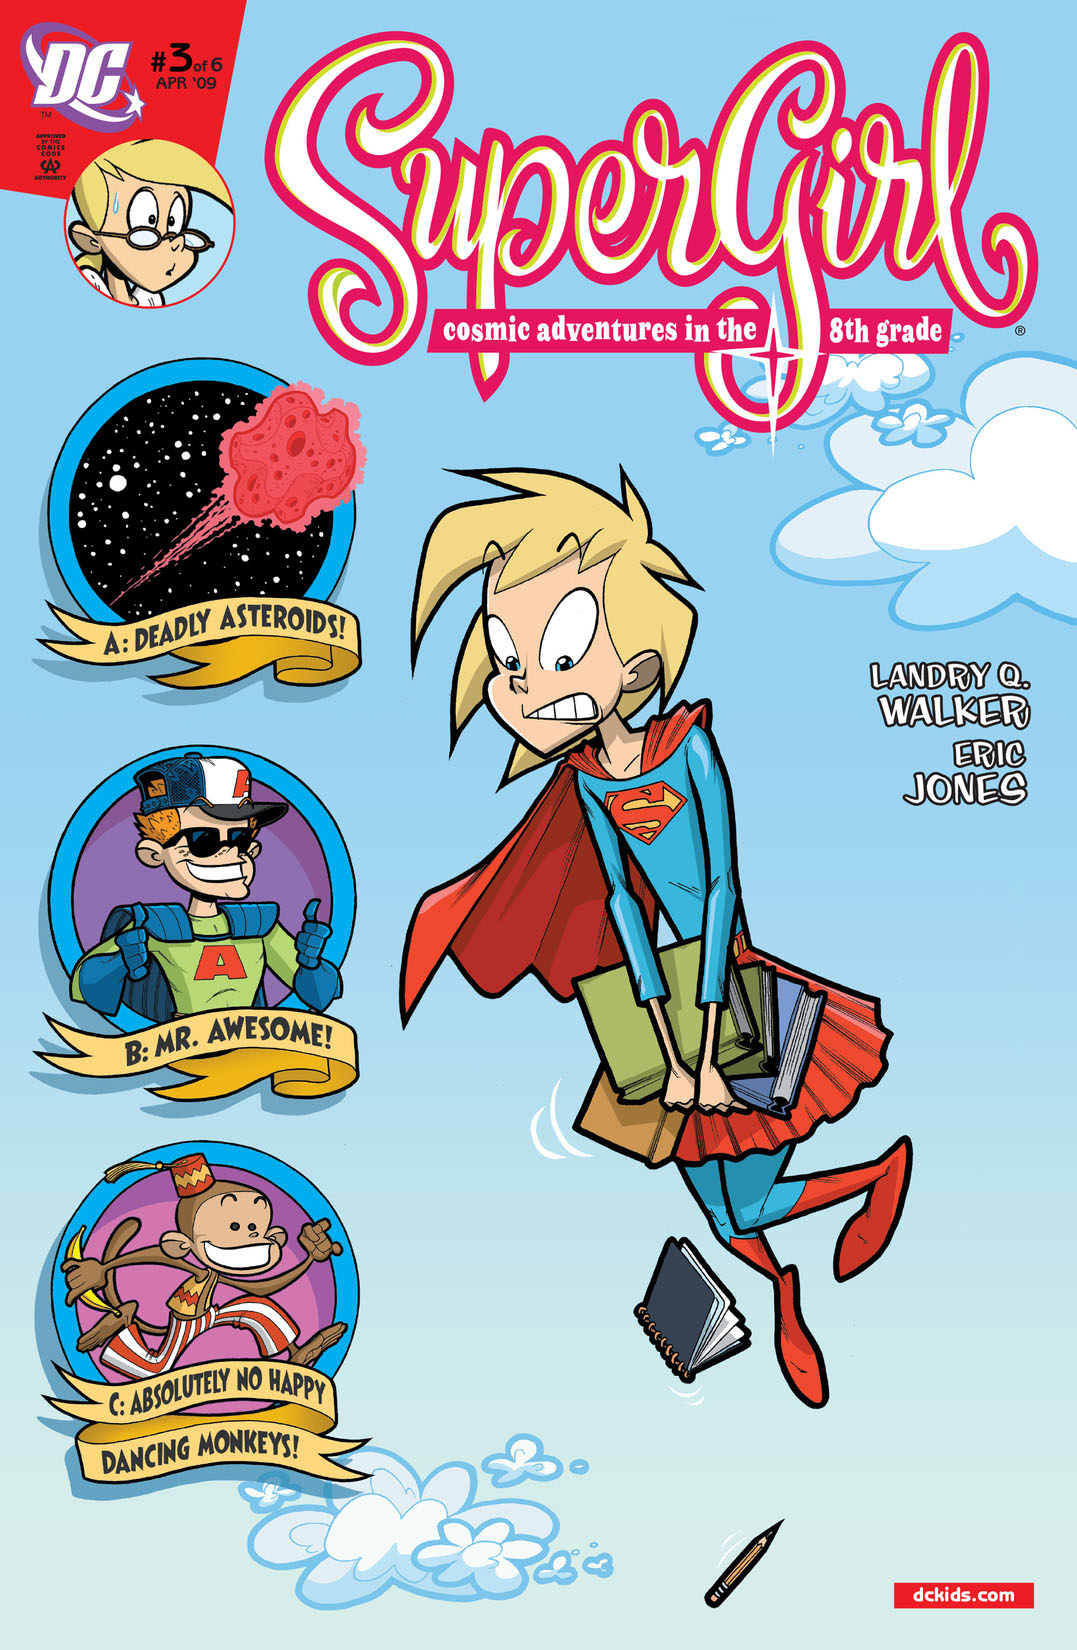 Supergirl: Cosmic Adventures in the 8th Grade #3 preview images